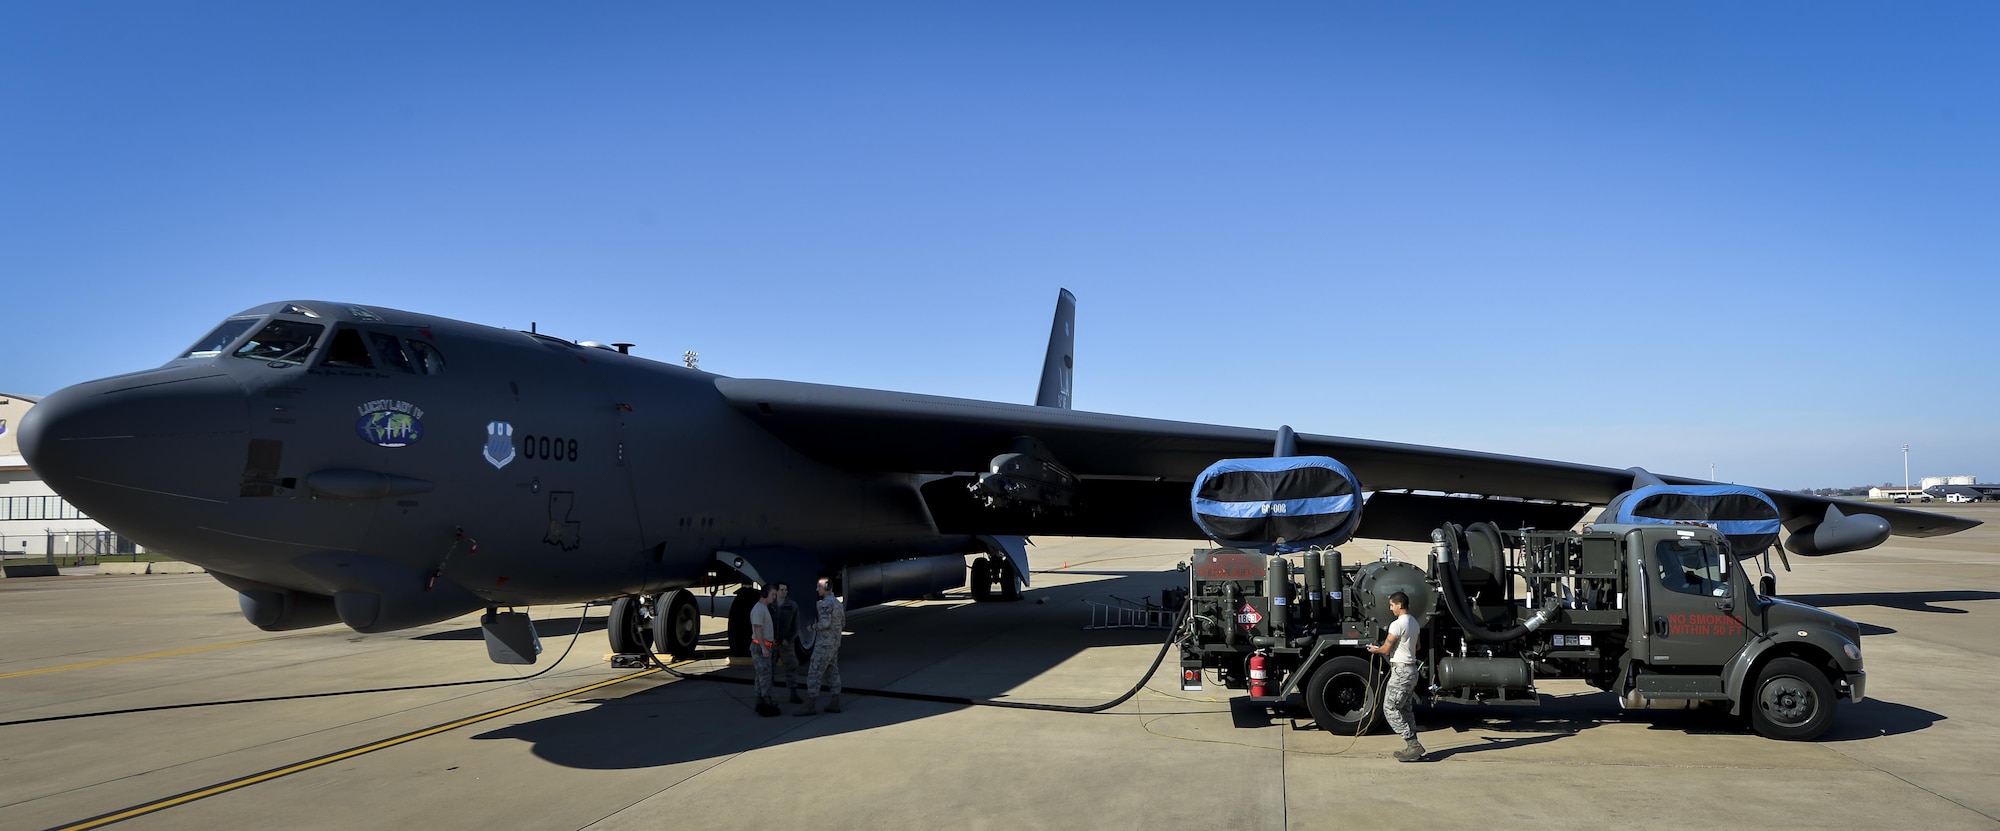 Airmen assigned to the 2nd Logistics Readiness Squadron petroleum, oils and lubricants distribution flight fuel a B-52 Stratofortress at Barksdale Air Force Base, La., Jan. 12, 2016. The distribution flight uses 22 vehicles to move an average of 600,000 gallons of fuel per week. (U.S. Air Force photo/Airman 1st Class Mozer O. Da Cunha)

